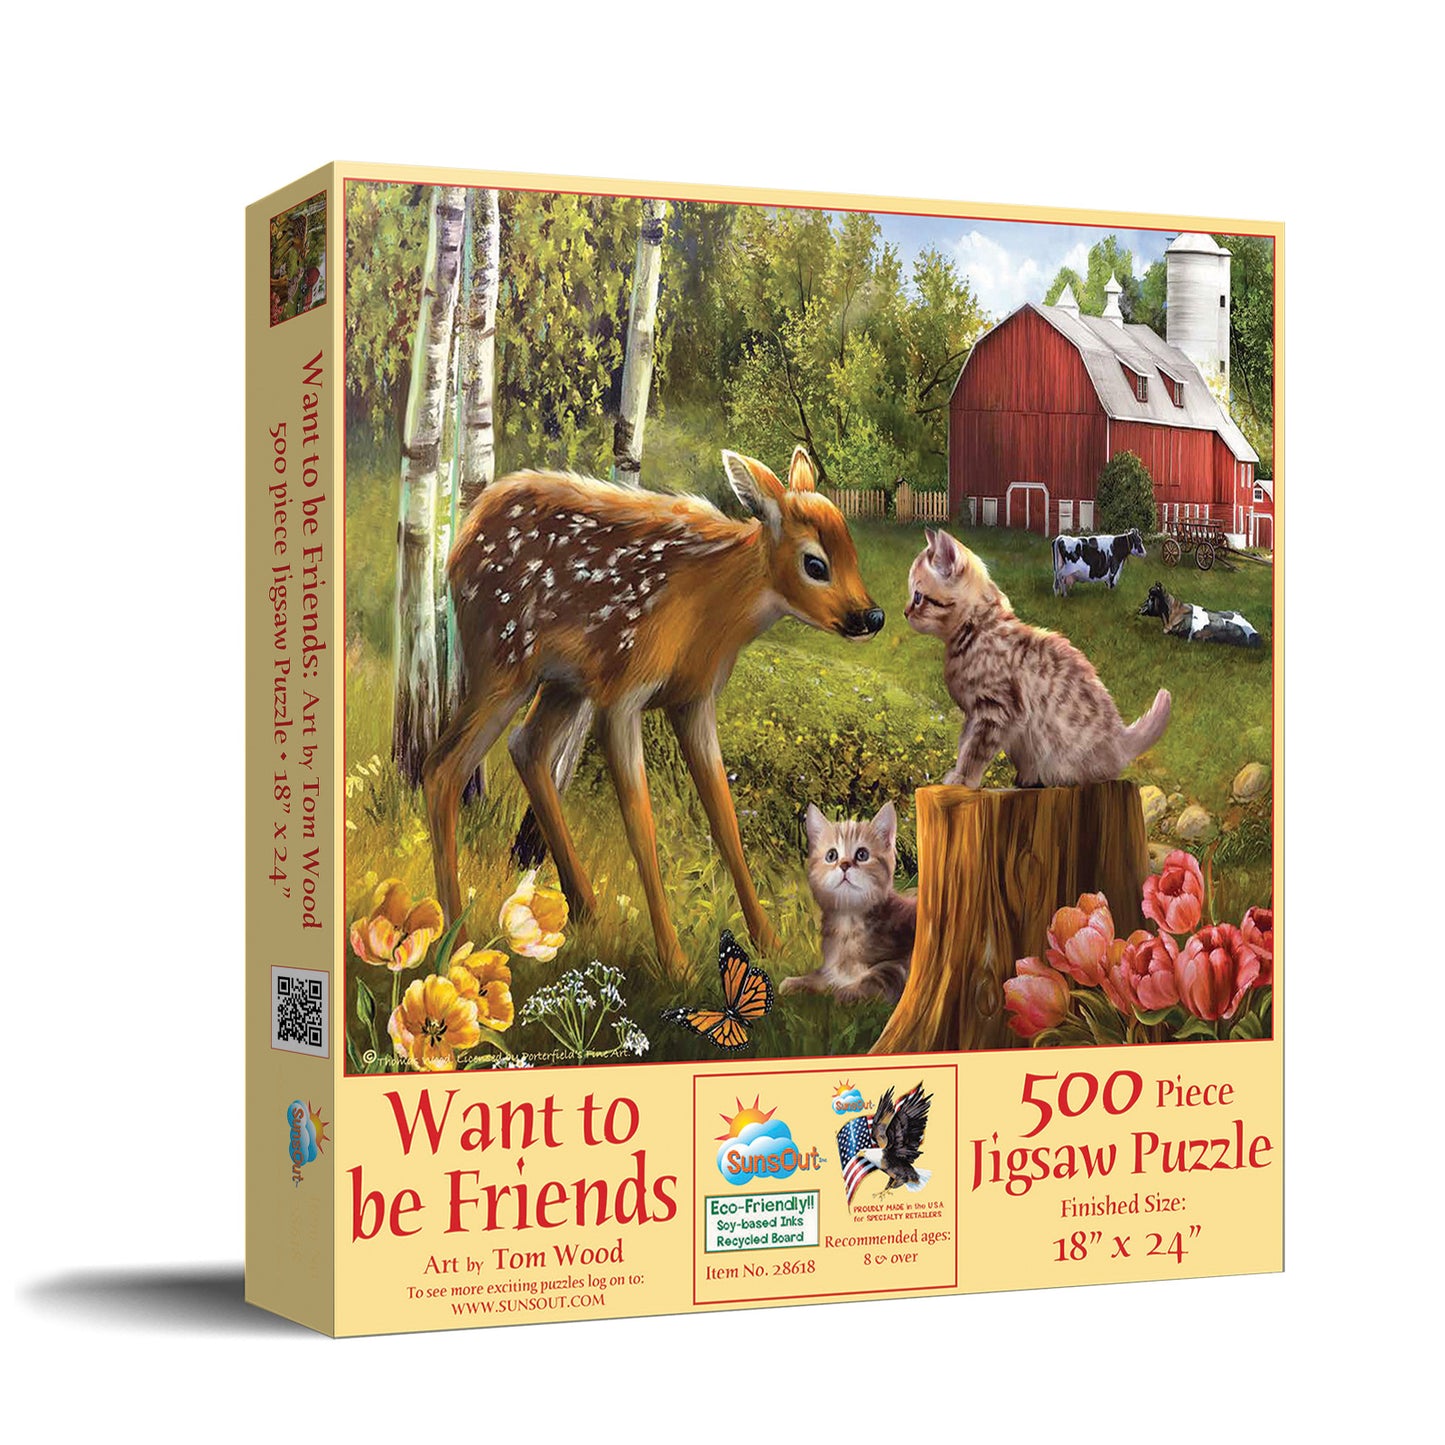 Want to be Friends - 500 Piece Jigsaw Puzzle